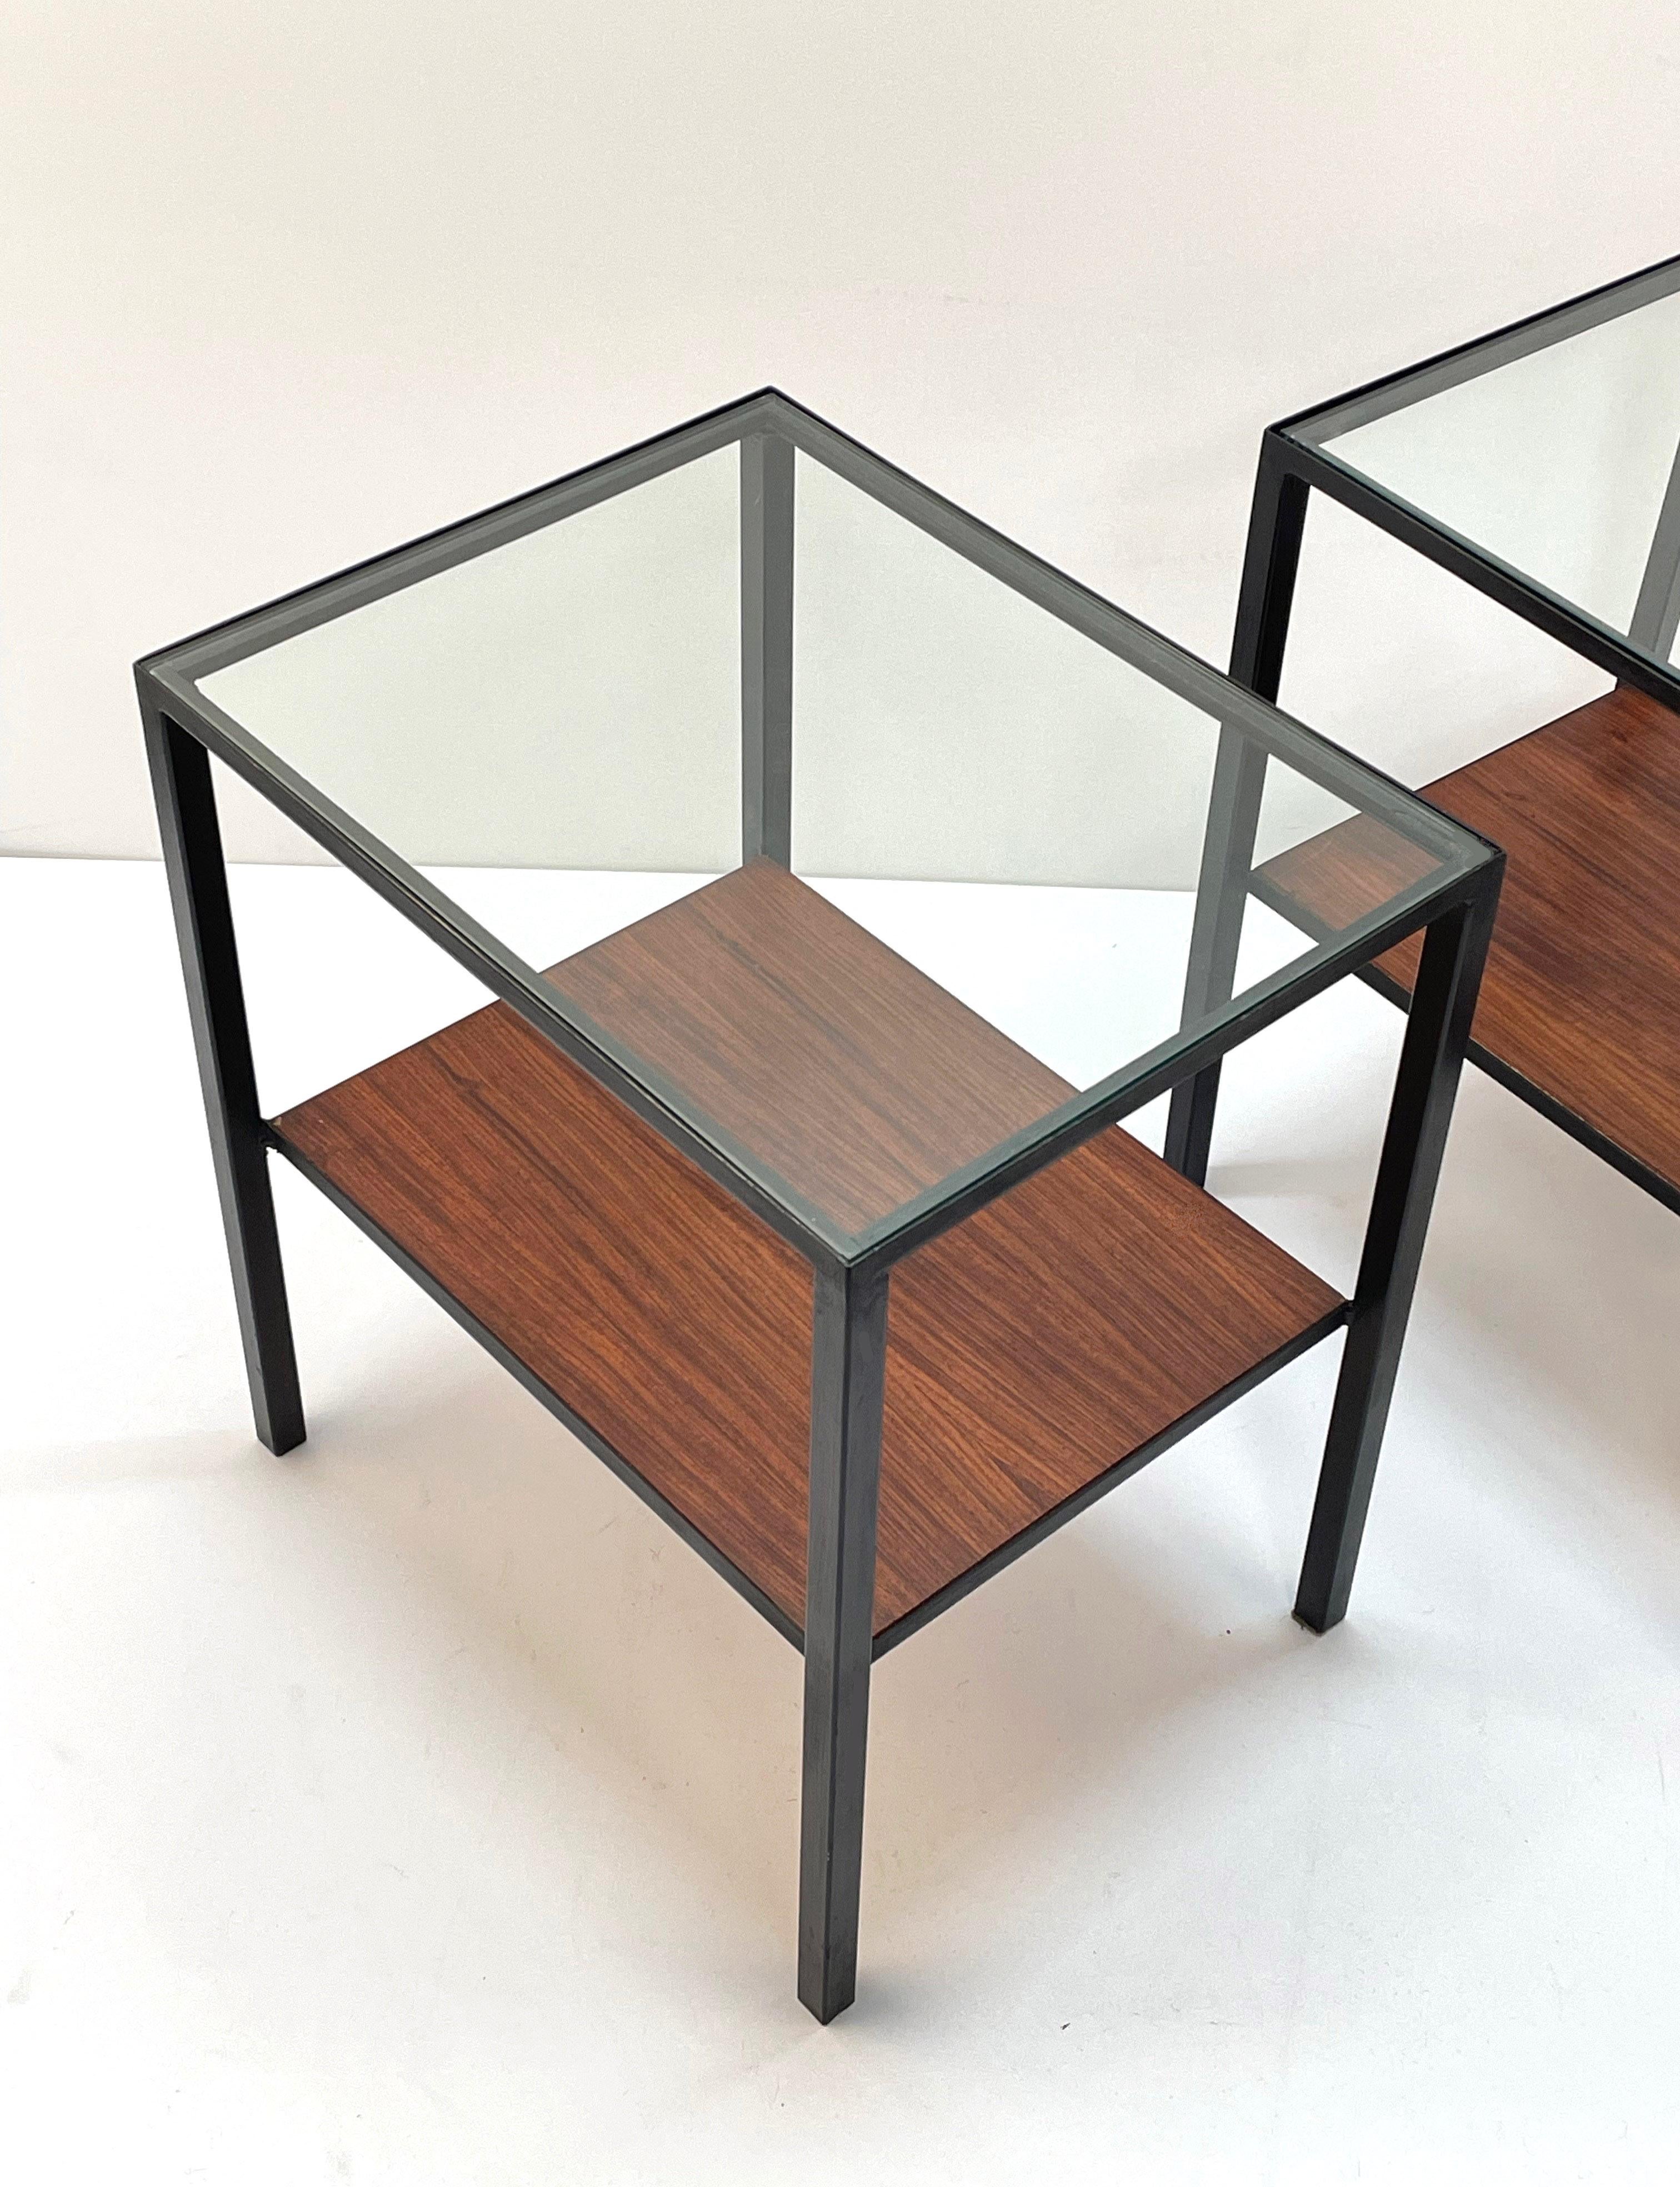 Pair of Iron, Glass and Wood Italian Coffee Table with Two Shelves, 1960s For Sale 10